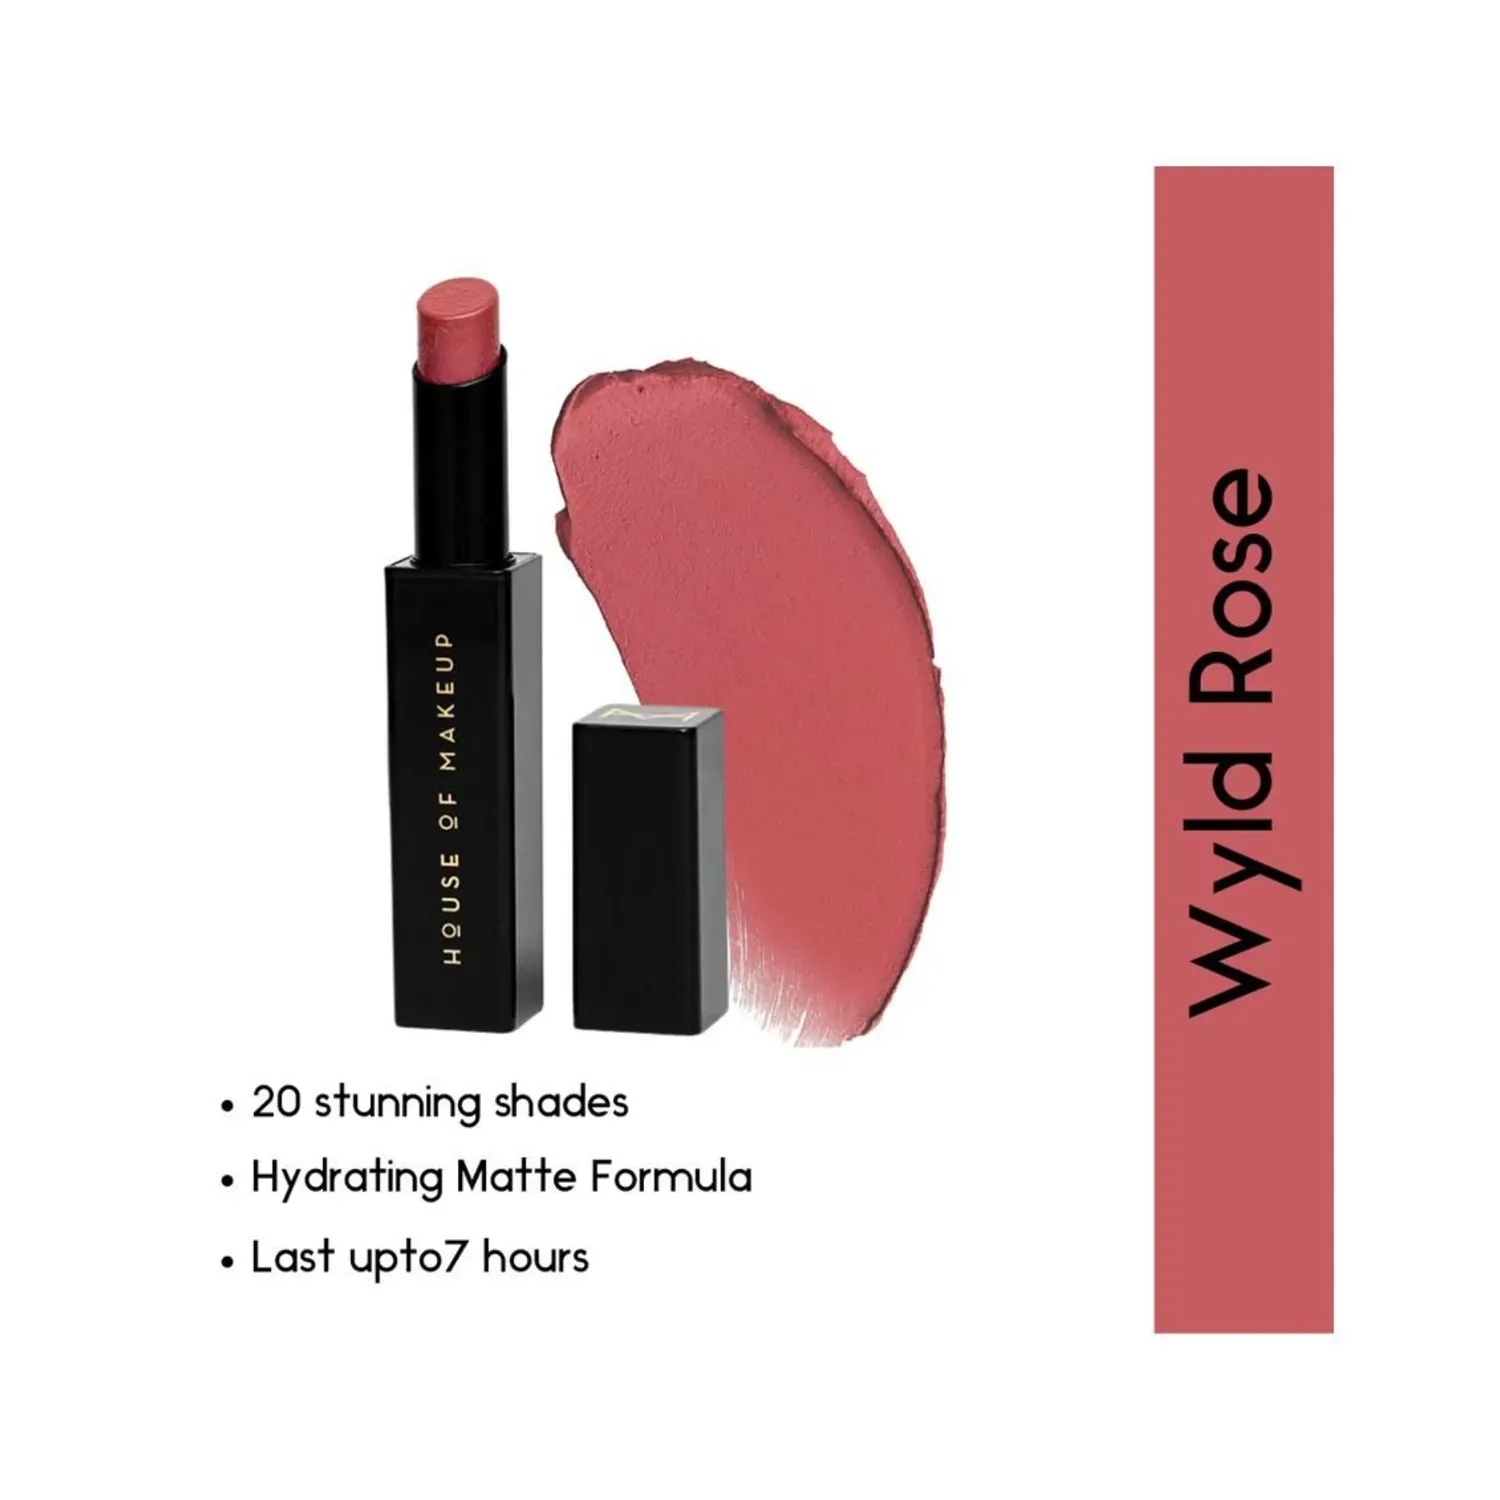 HOUSE OF MAKEUP | HOUSE OF MAKEUP Good On You Hydra Matte Lipstick - Wyld Rose (3.5g)